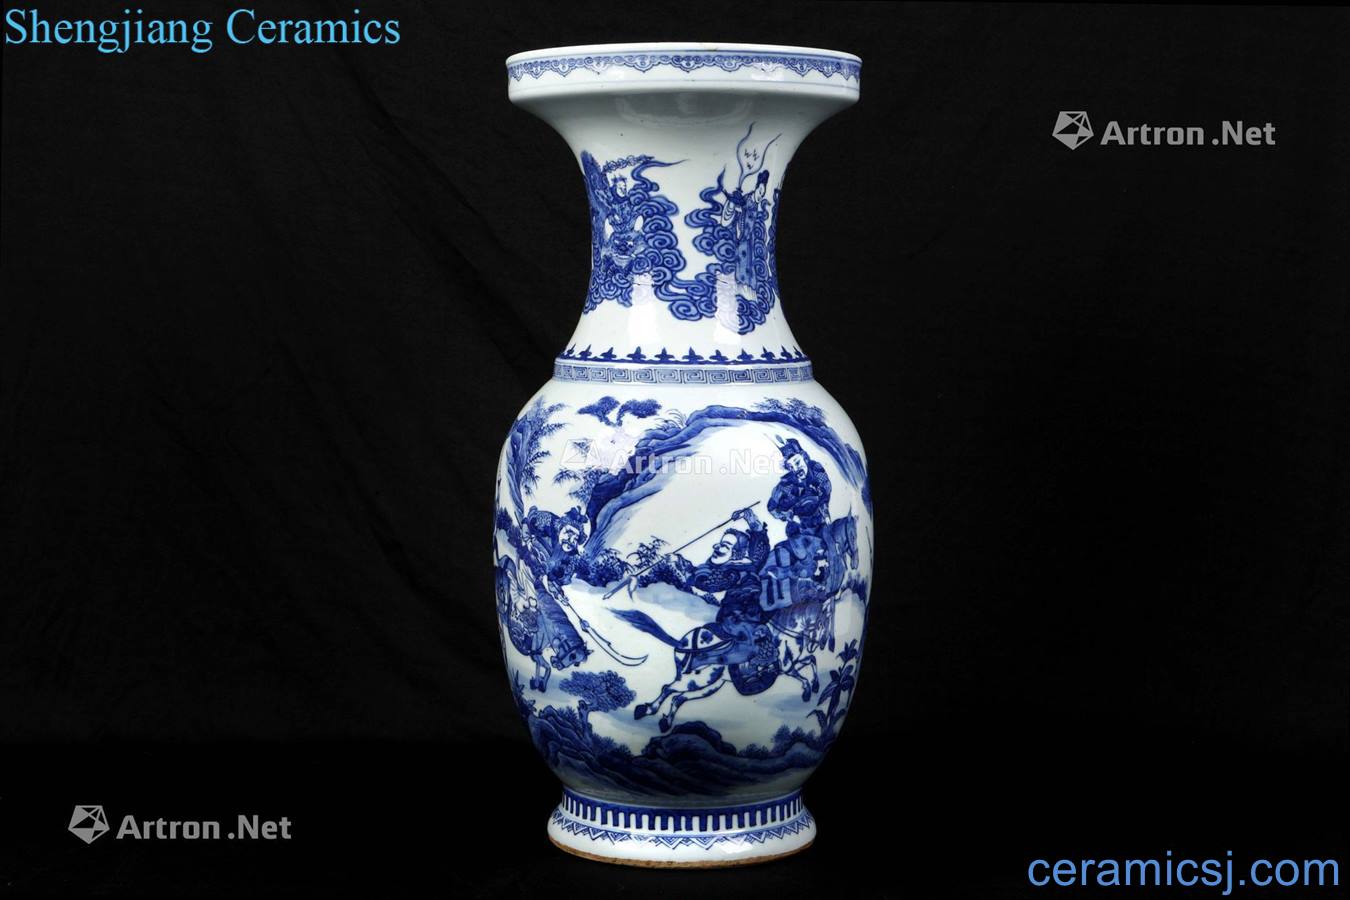 The late qing dynasty blue and white vase